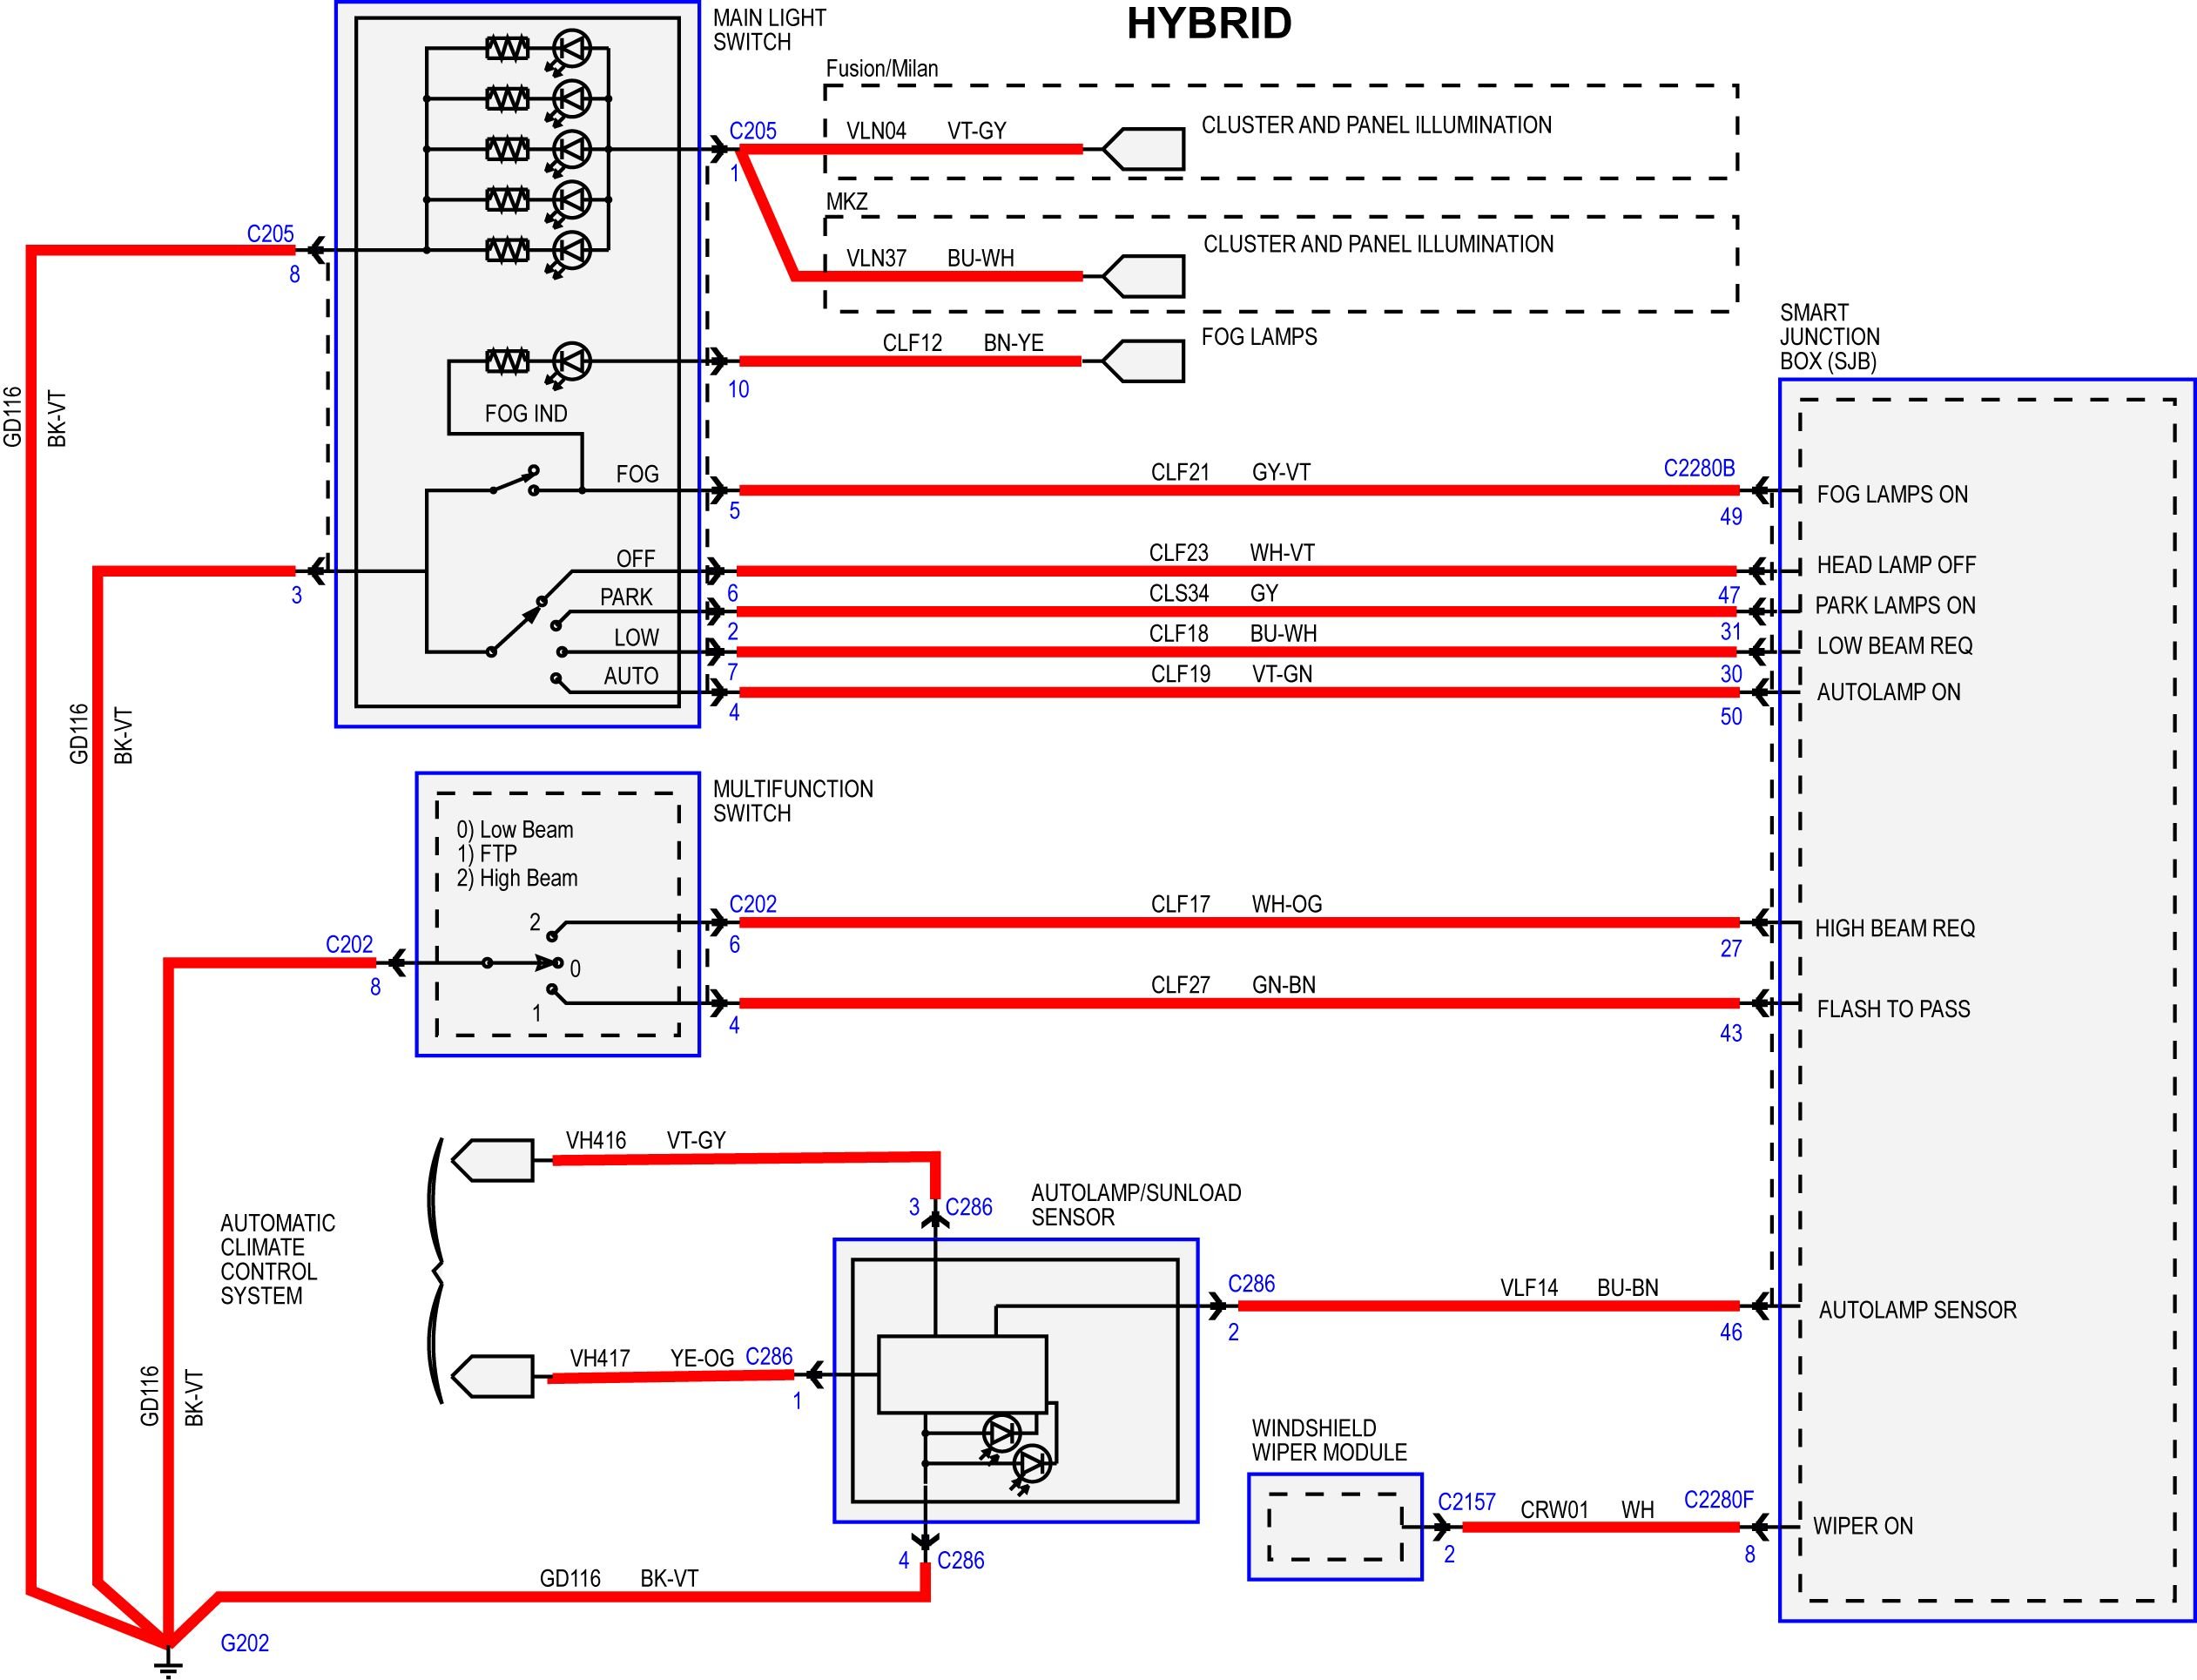 Wiring diagrams. (yes another wiring diagram question) - 2010-2012 Ford